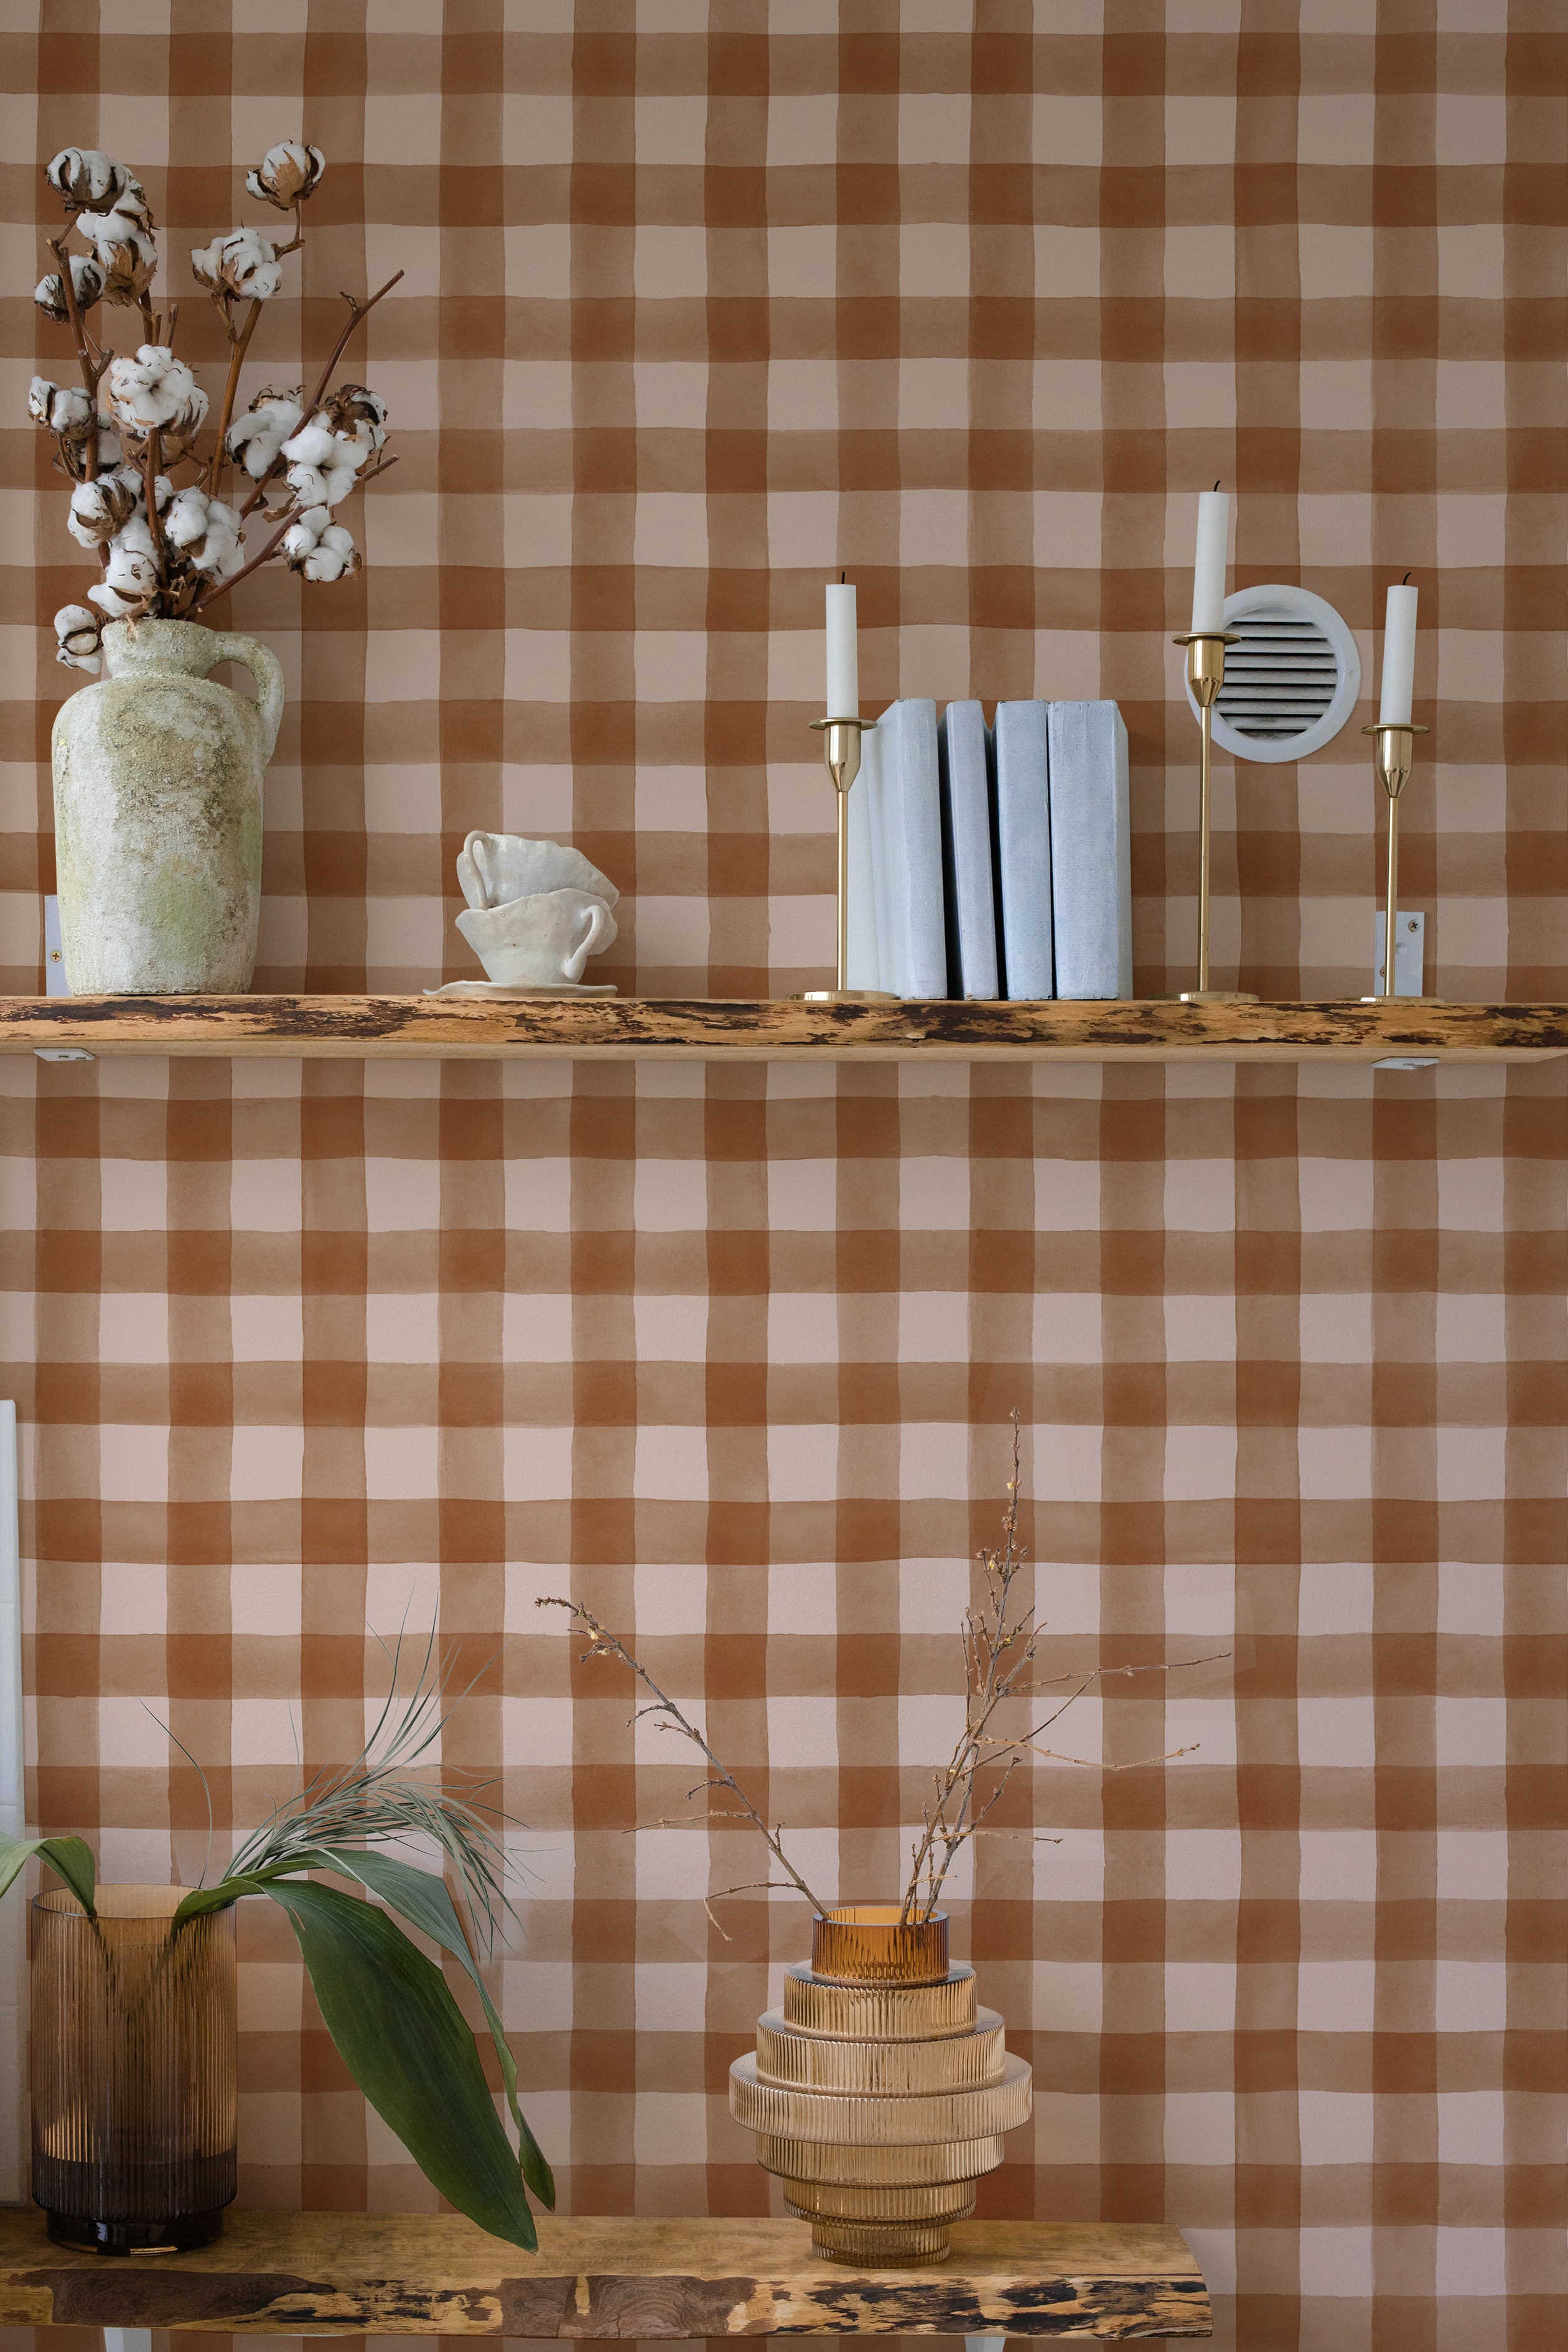 A warmly styled interior scene featuring a wall covered in Cuadro de Búfalo wallpaper with a classic brown and beige checkered pattern. The decor includes a rustic wooden shelf displaying a vase with cotton branches, a cup shaped like a spilt drink, and modern white candle holders.